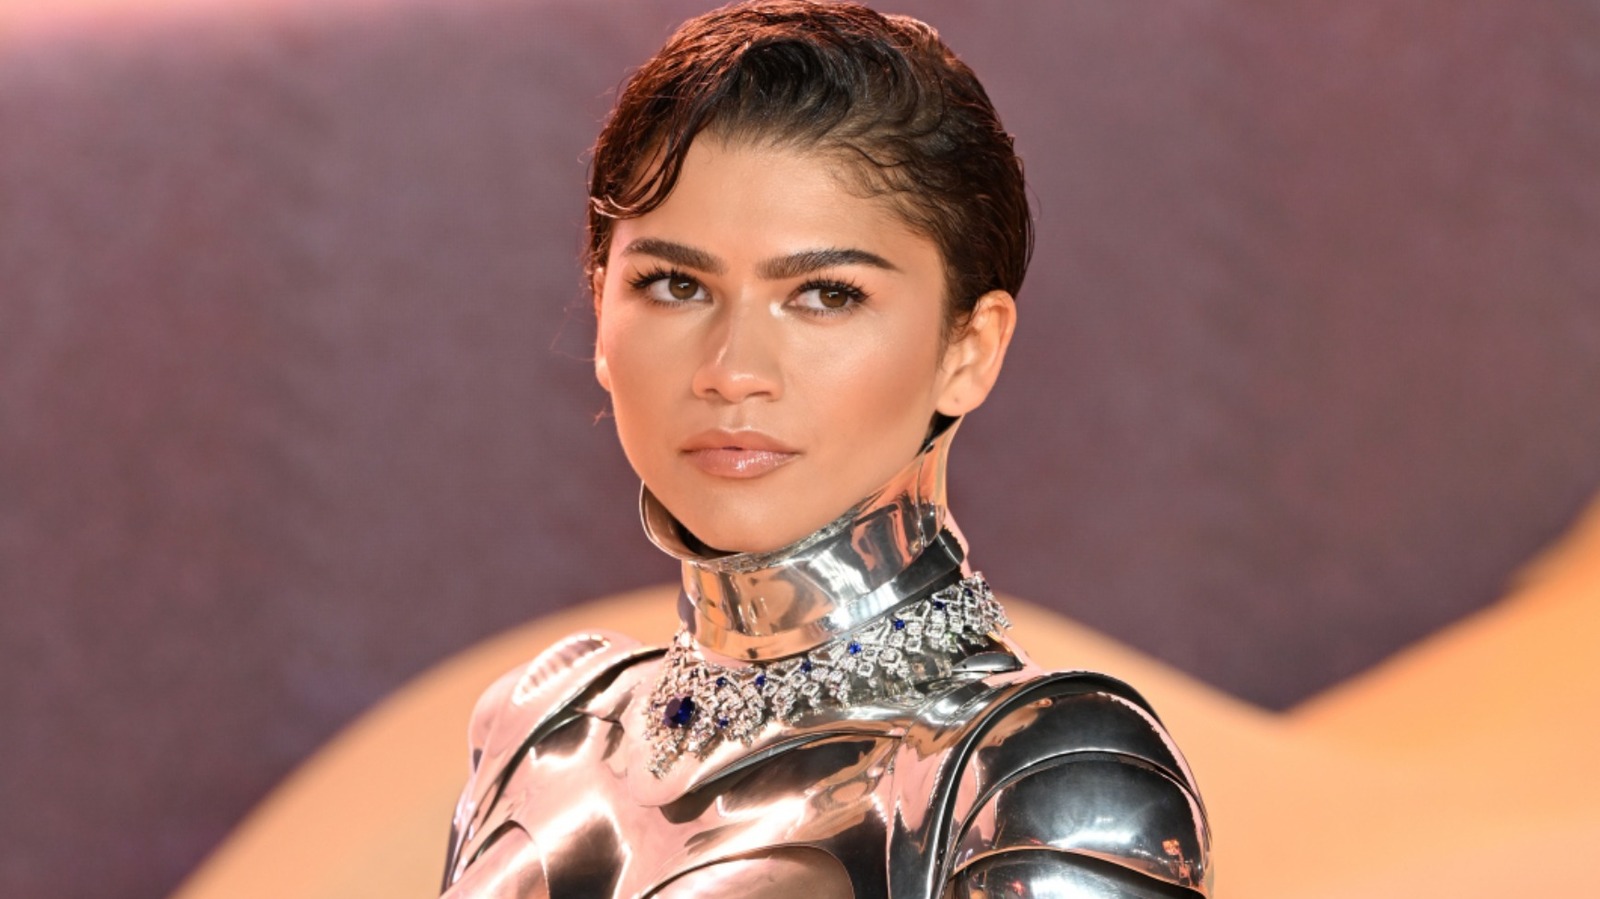 Zendaya's Dune Part Two Premiere Look Has Us Even More Excited For Her